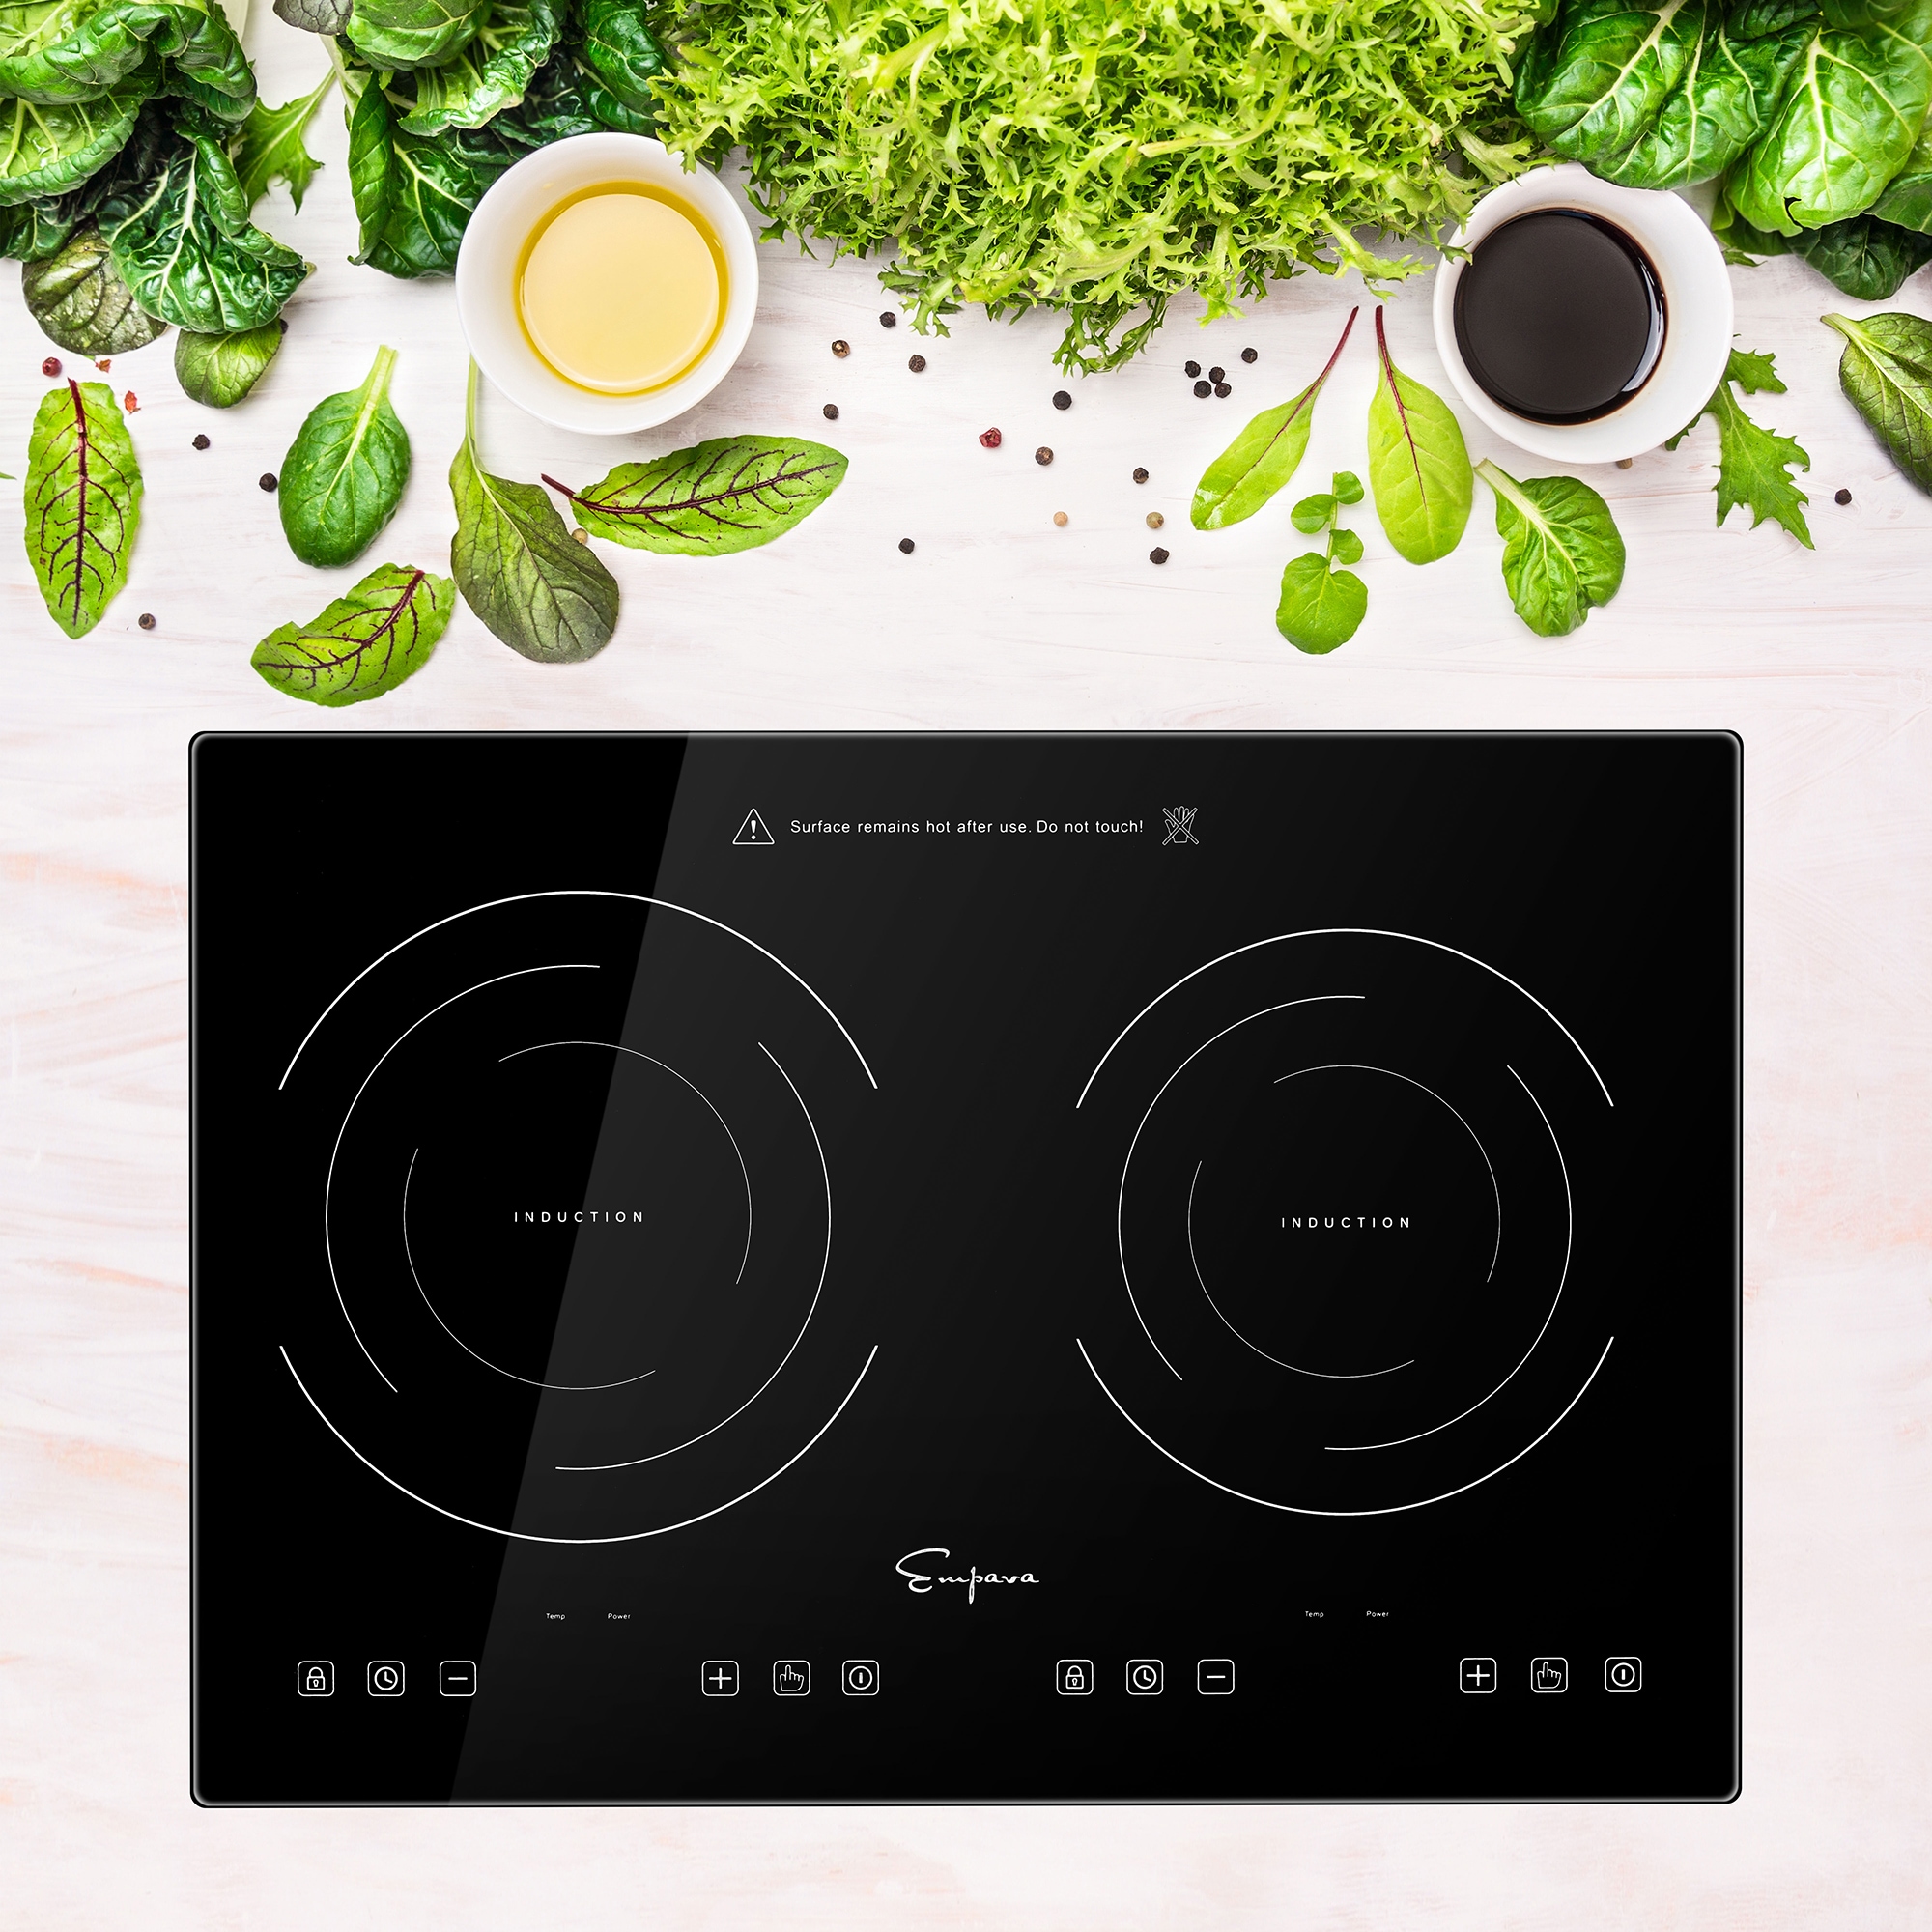 Portable Induction Cooktop Countertop Burner Black 1800W NEW Free 2 Day Shipping 